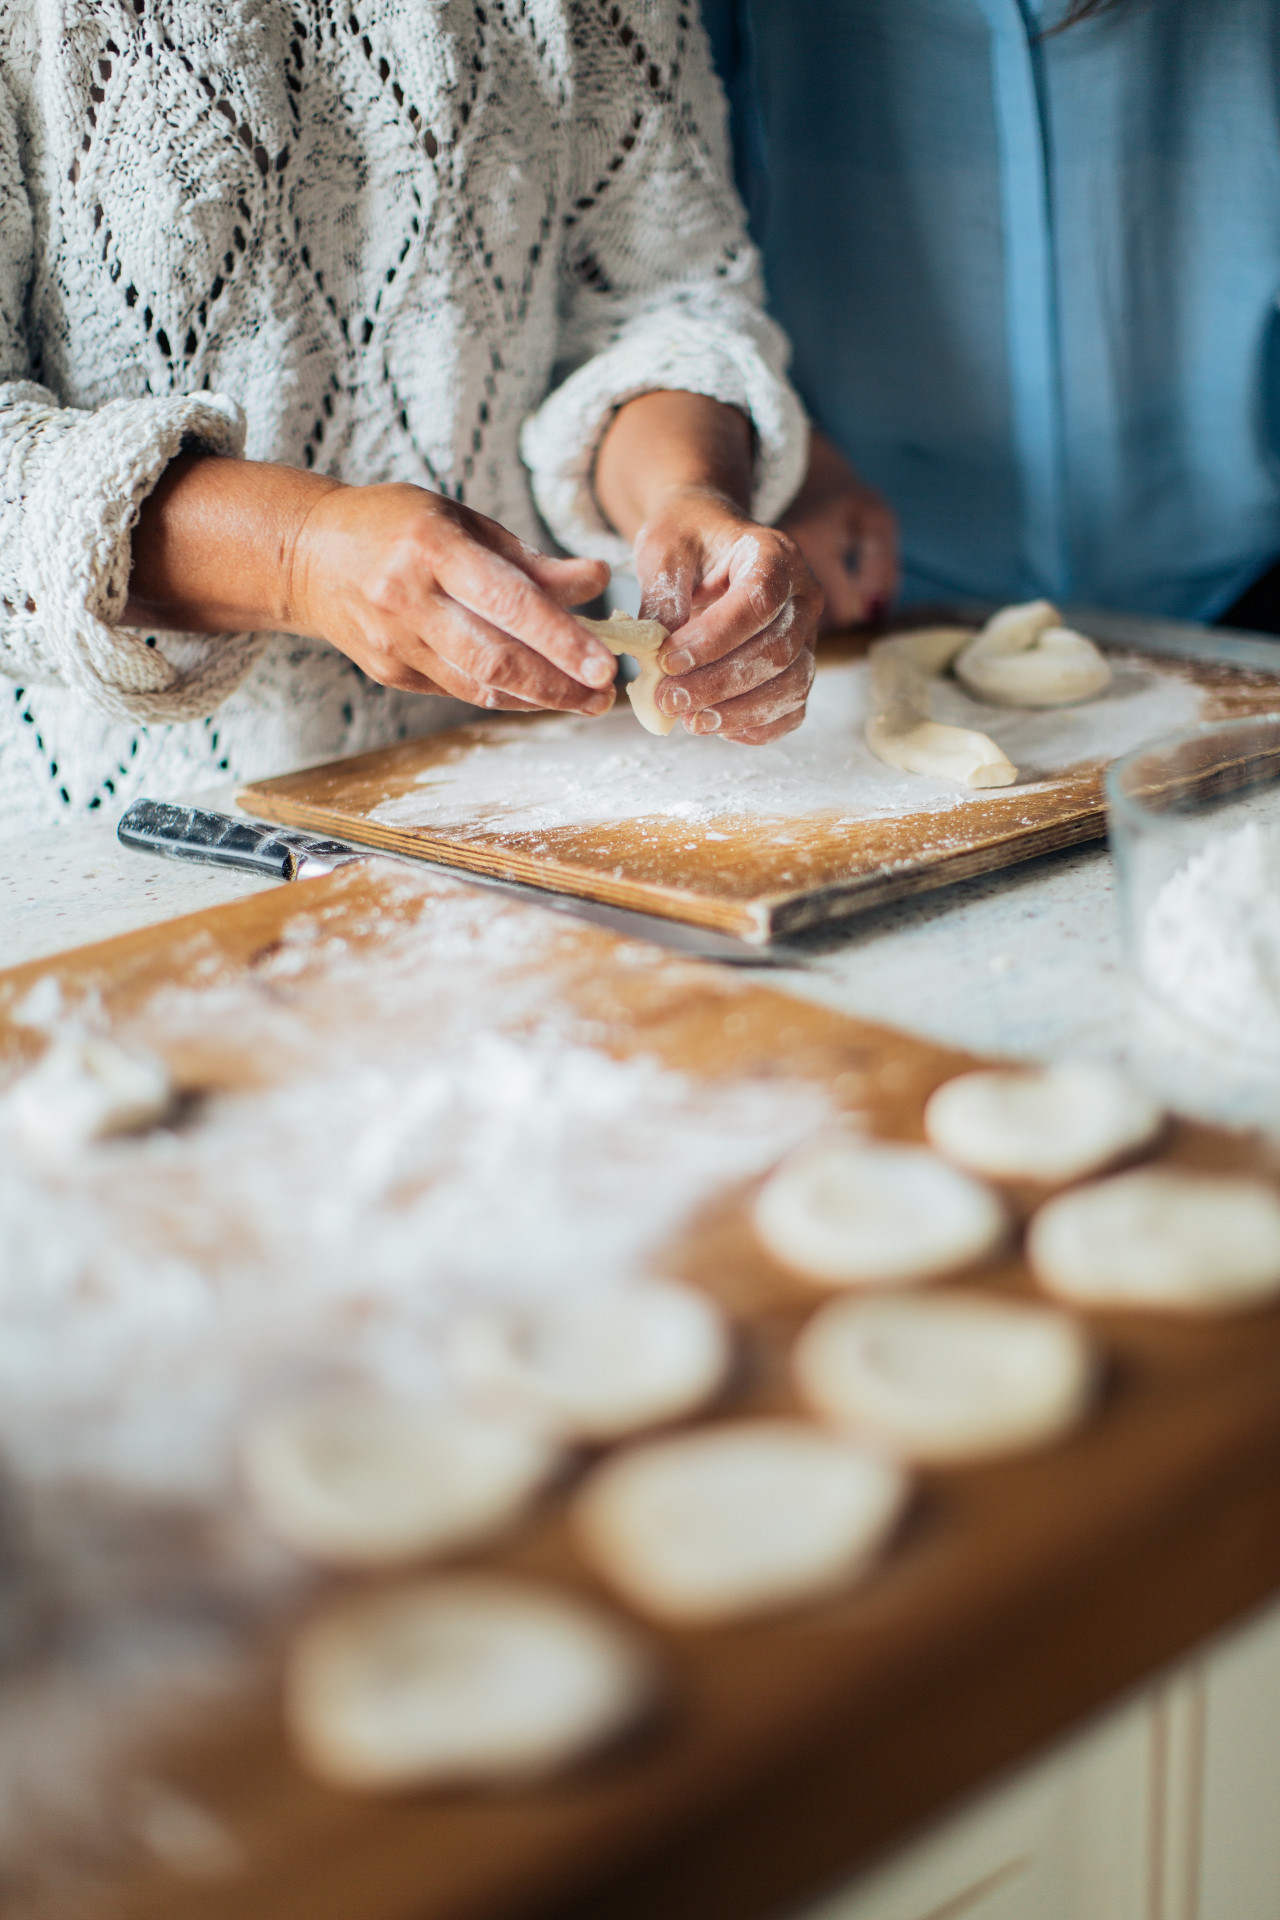  how to start a bakery - baking